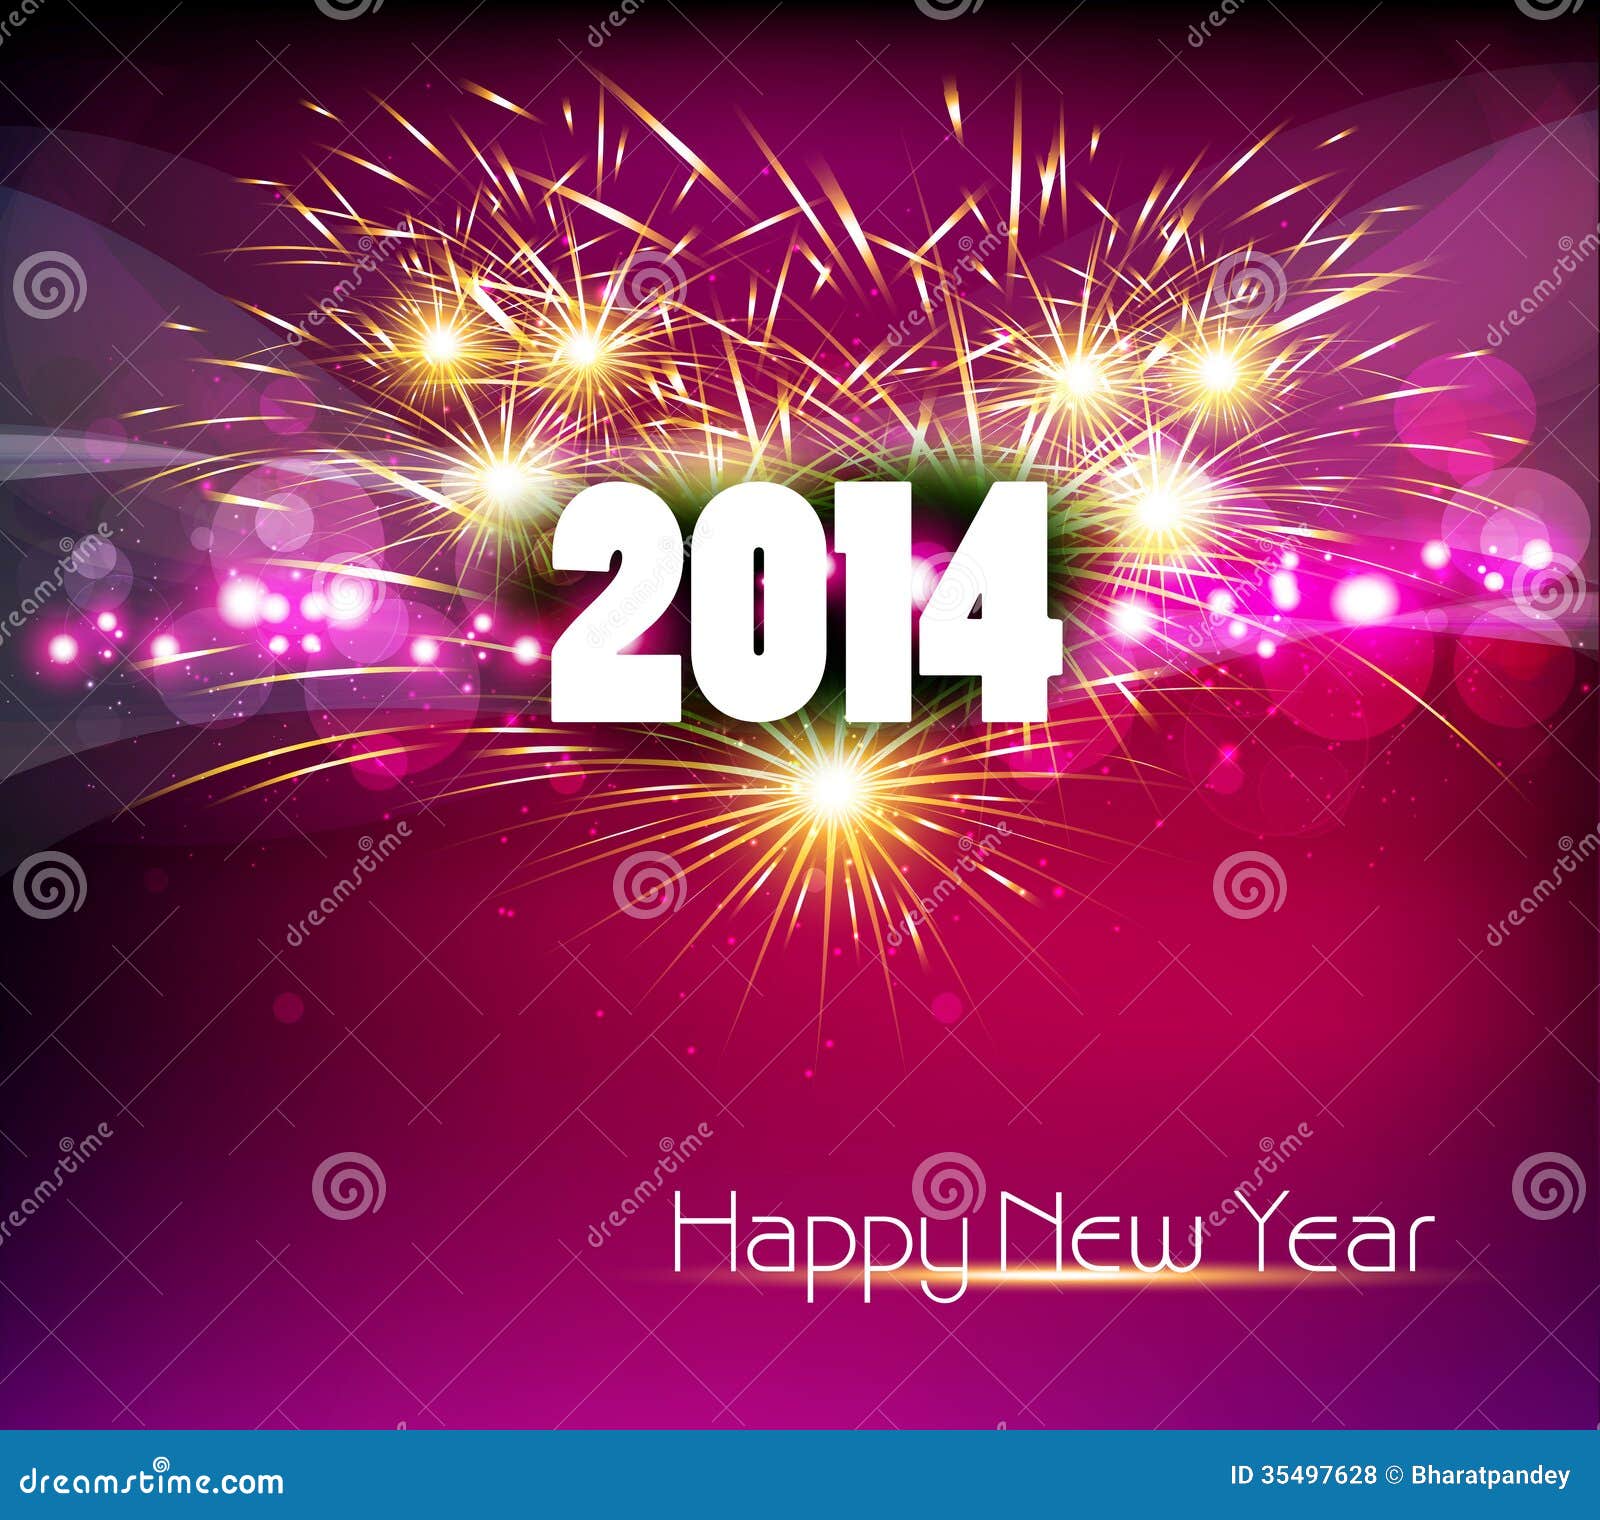 free animated clipart happy new year 2014 - photo #46